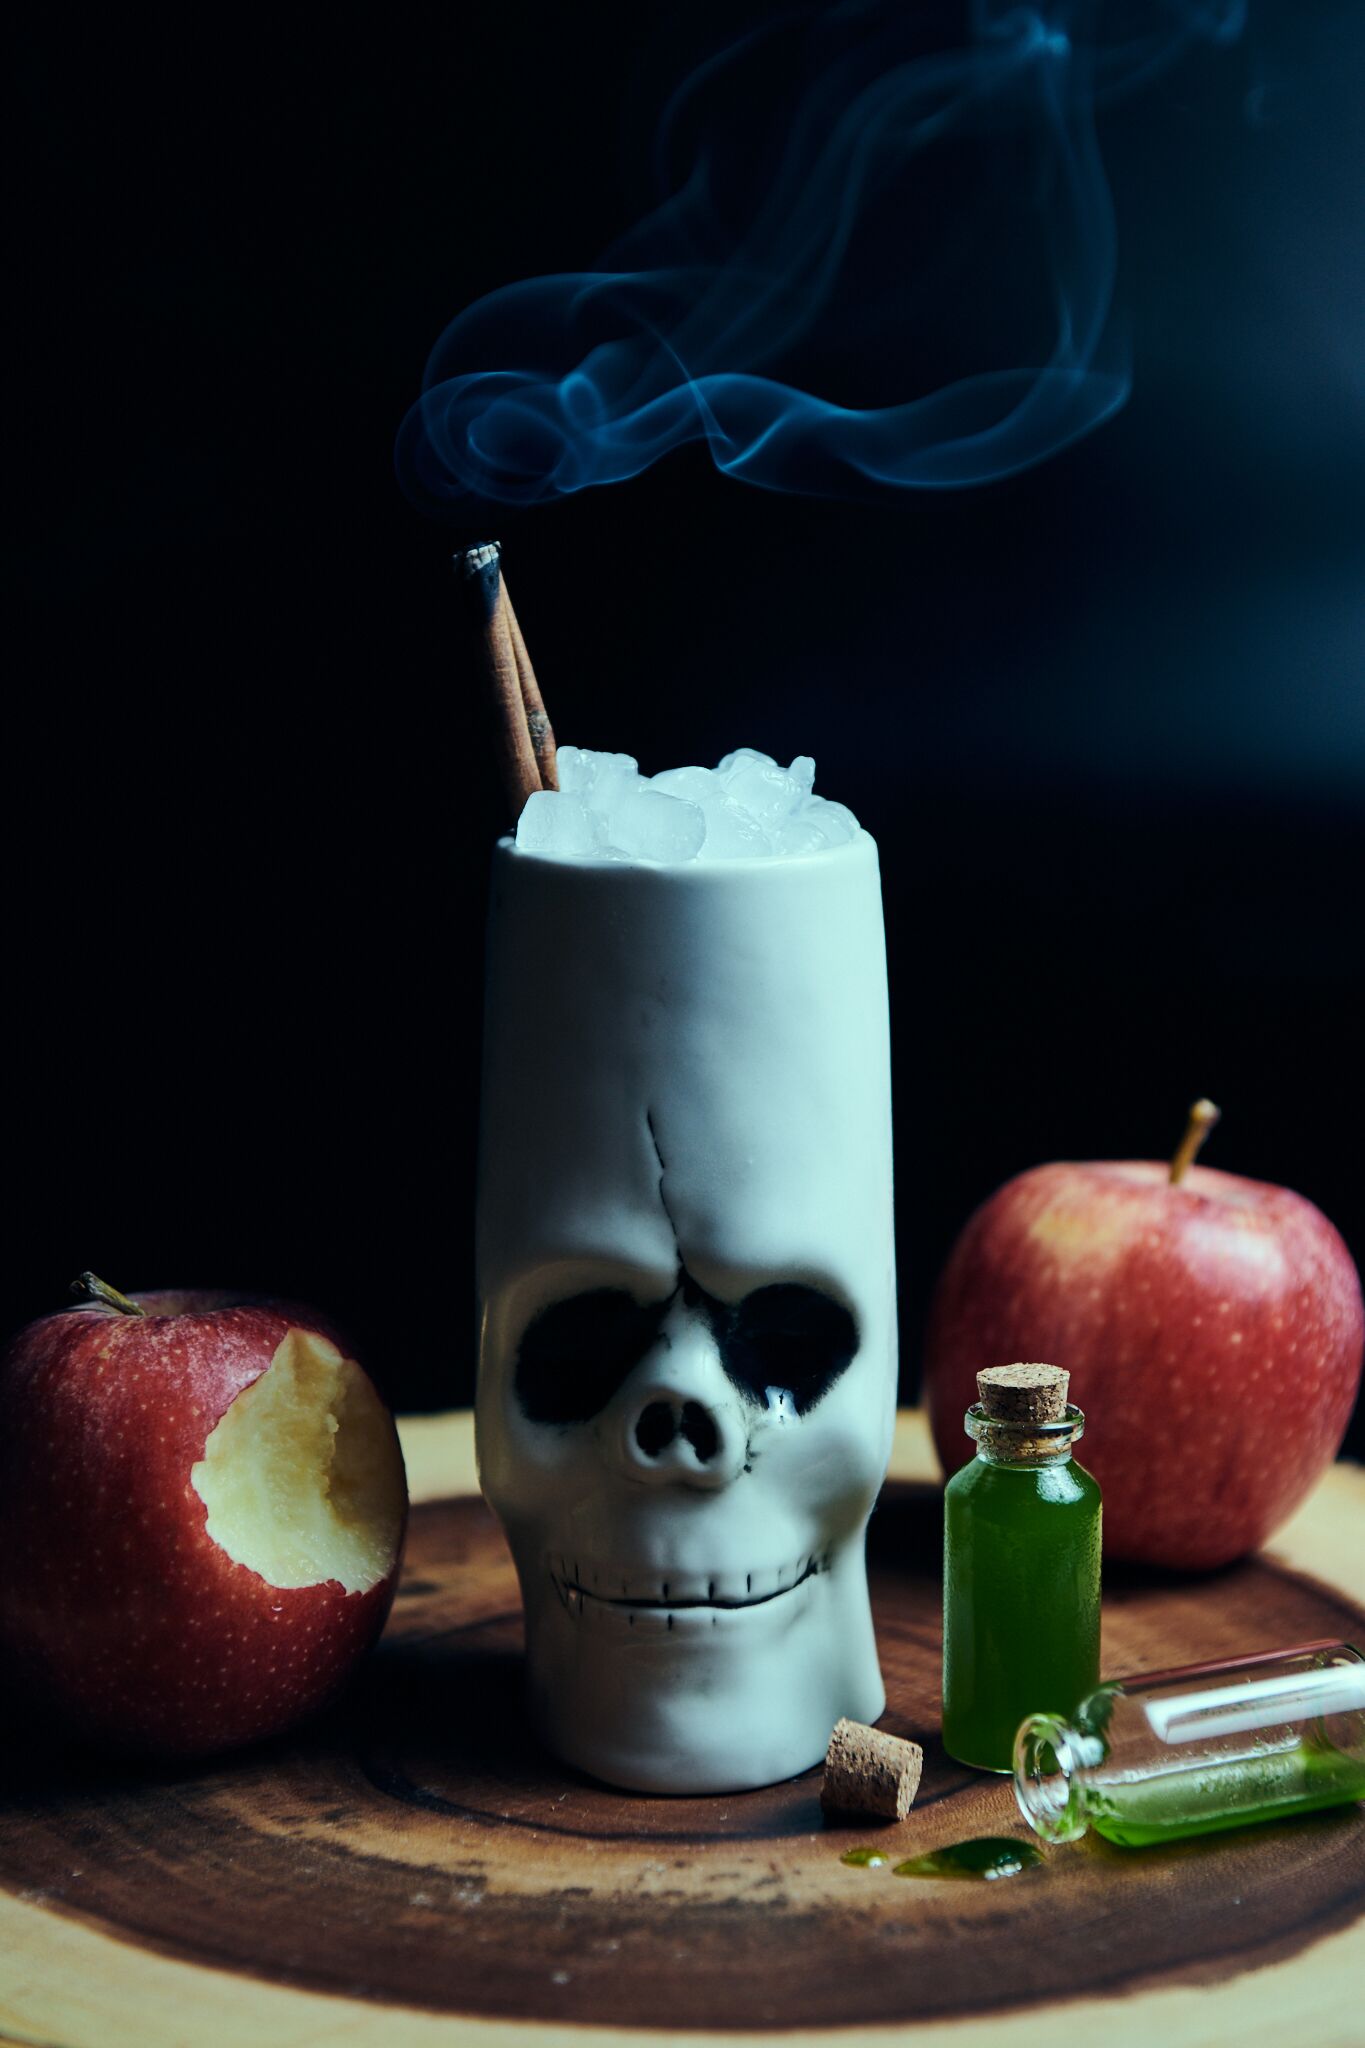 The tale of Snow White gets a whiskey and apple cider drink called the Fairest Apple of Them All. Photograph courtesy of Drink Company.